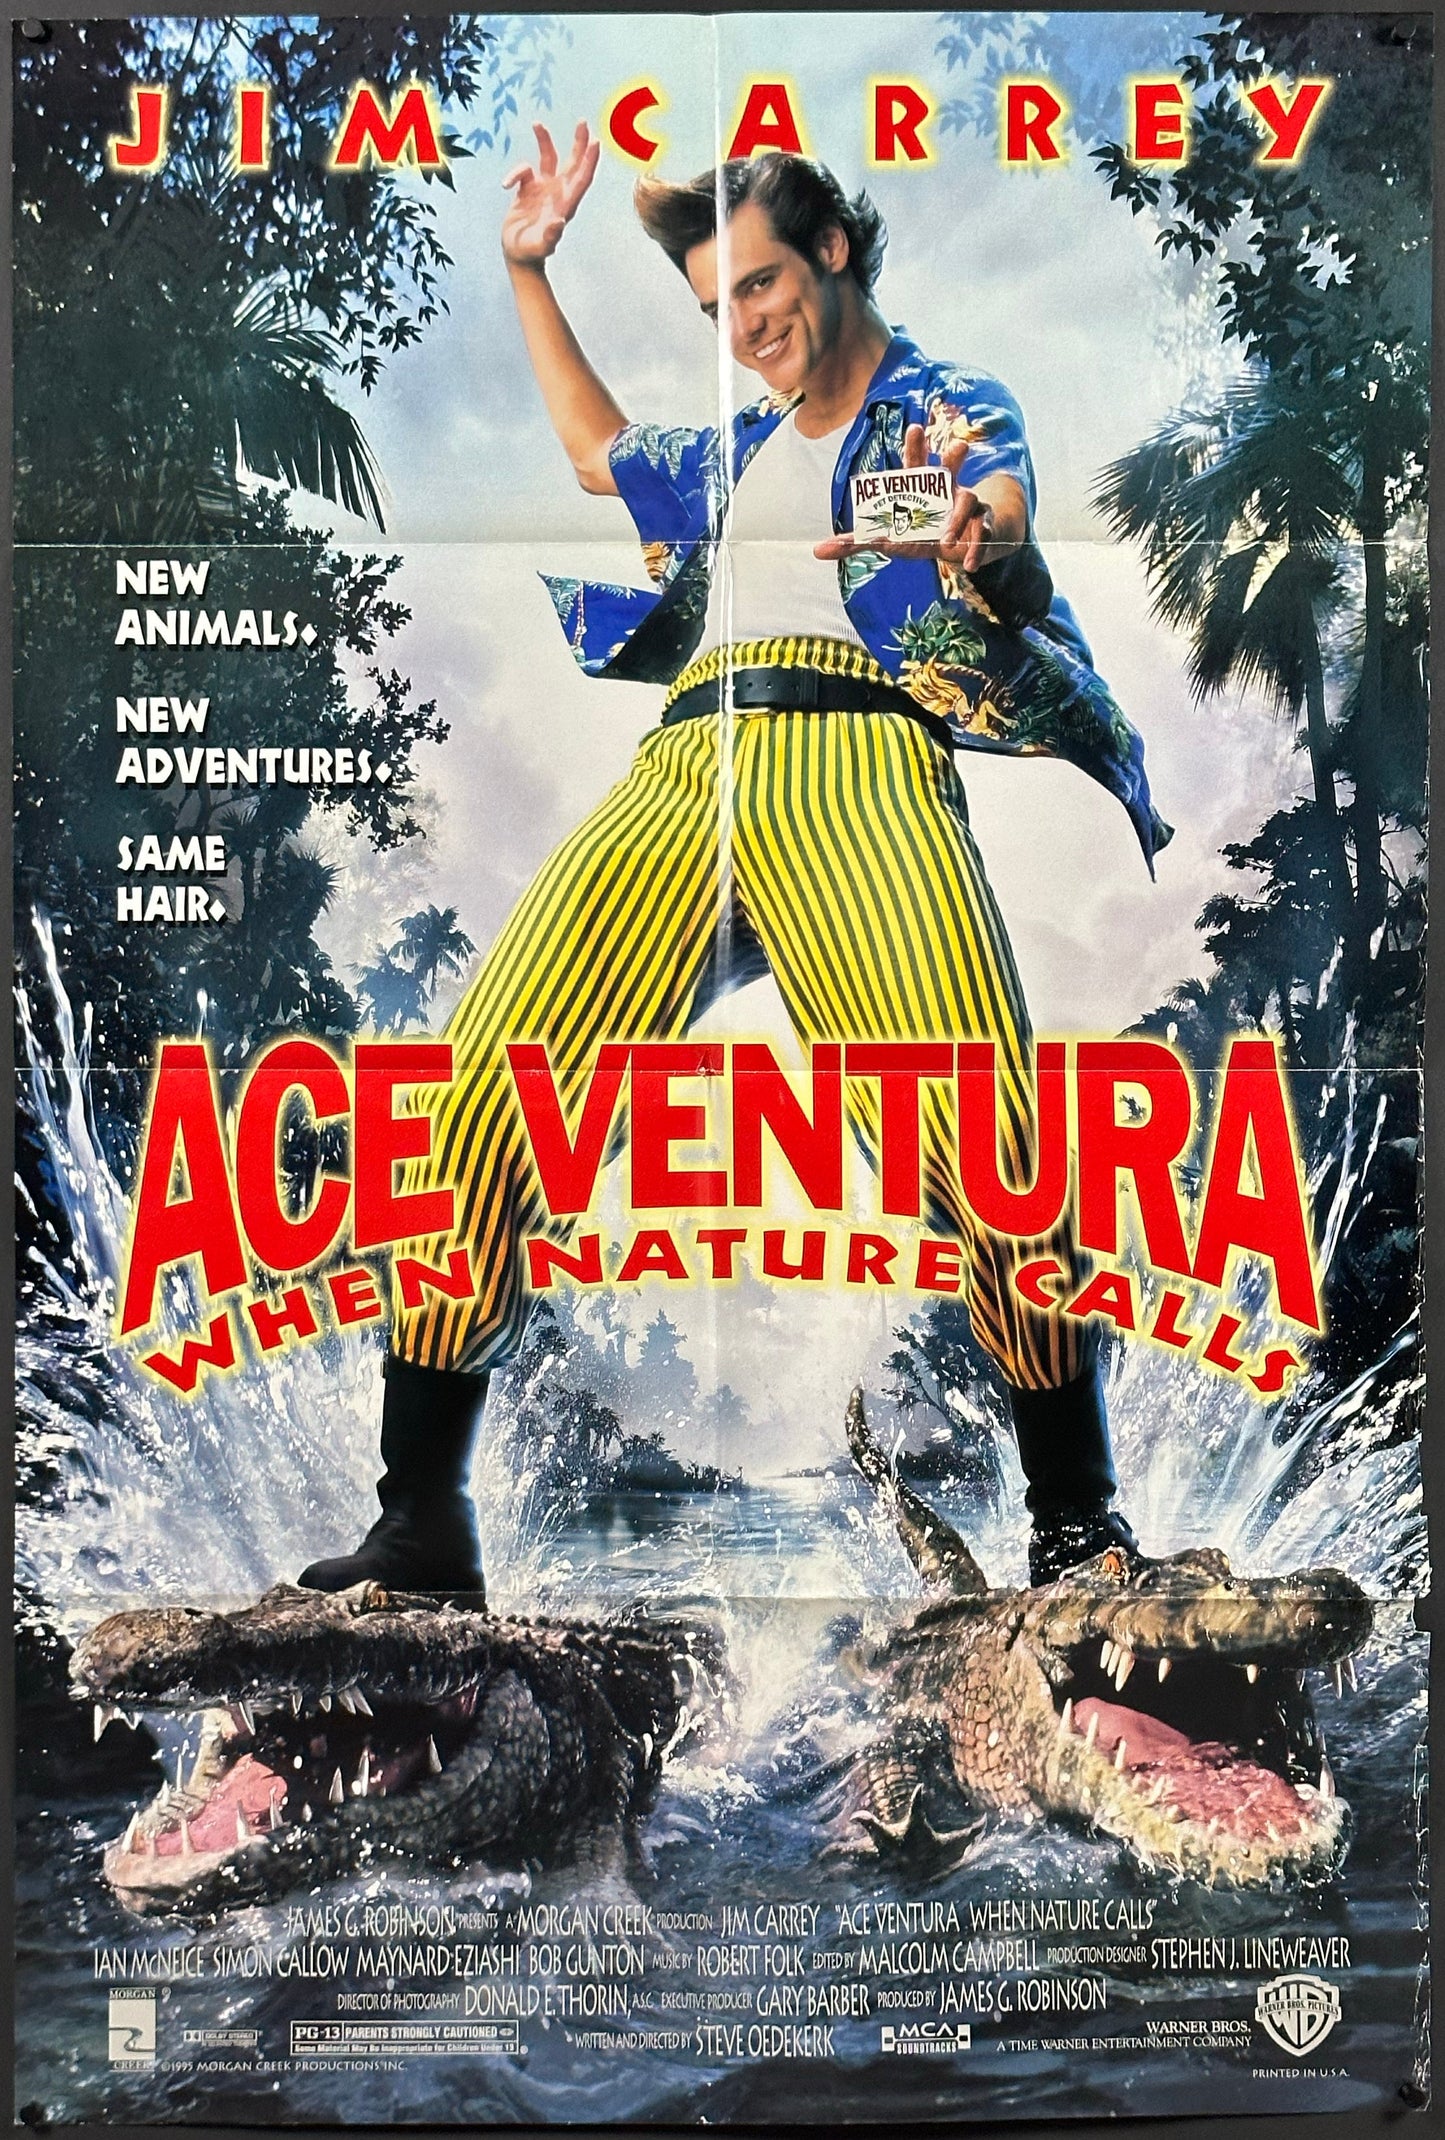 Ace Ventura: When Nature Calls US One Sheet (1995) - ORIGINAL RELEASE - posterpalace.com